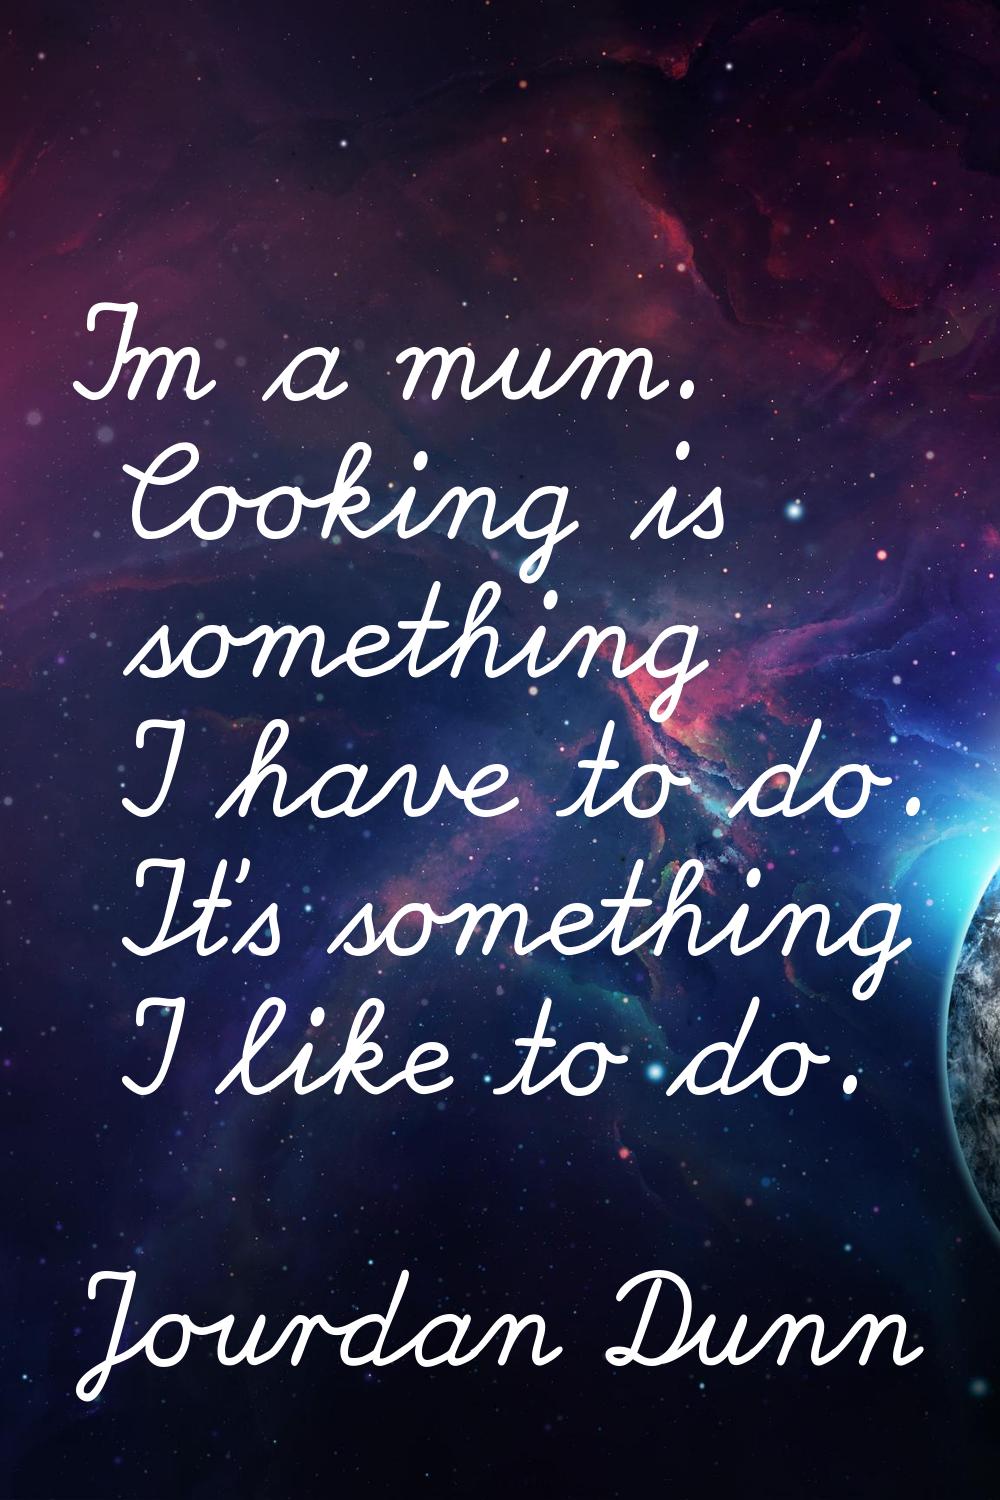 I'm a mum. Cooking is something I have to do. It's something I like to do.